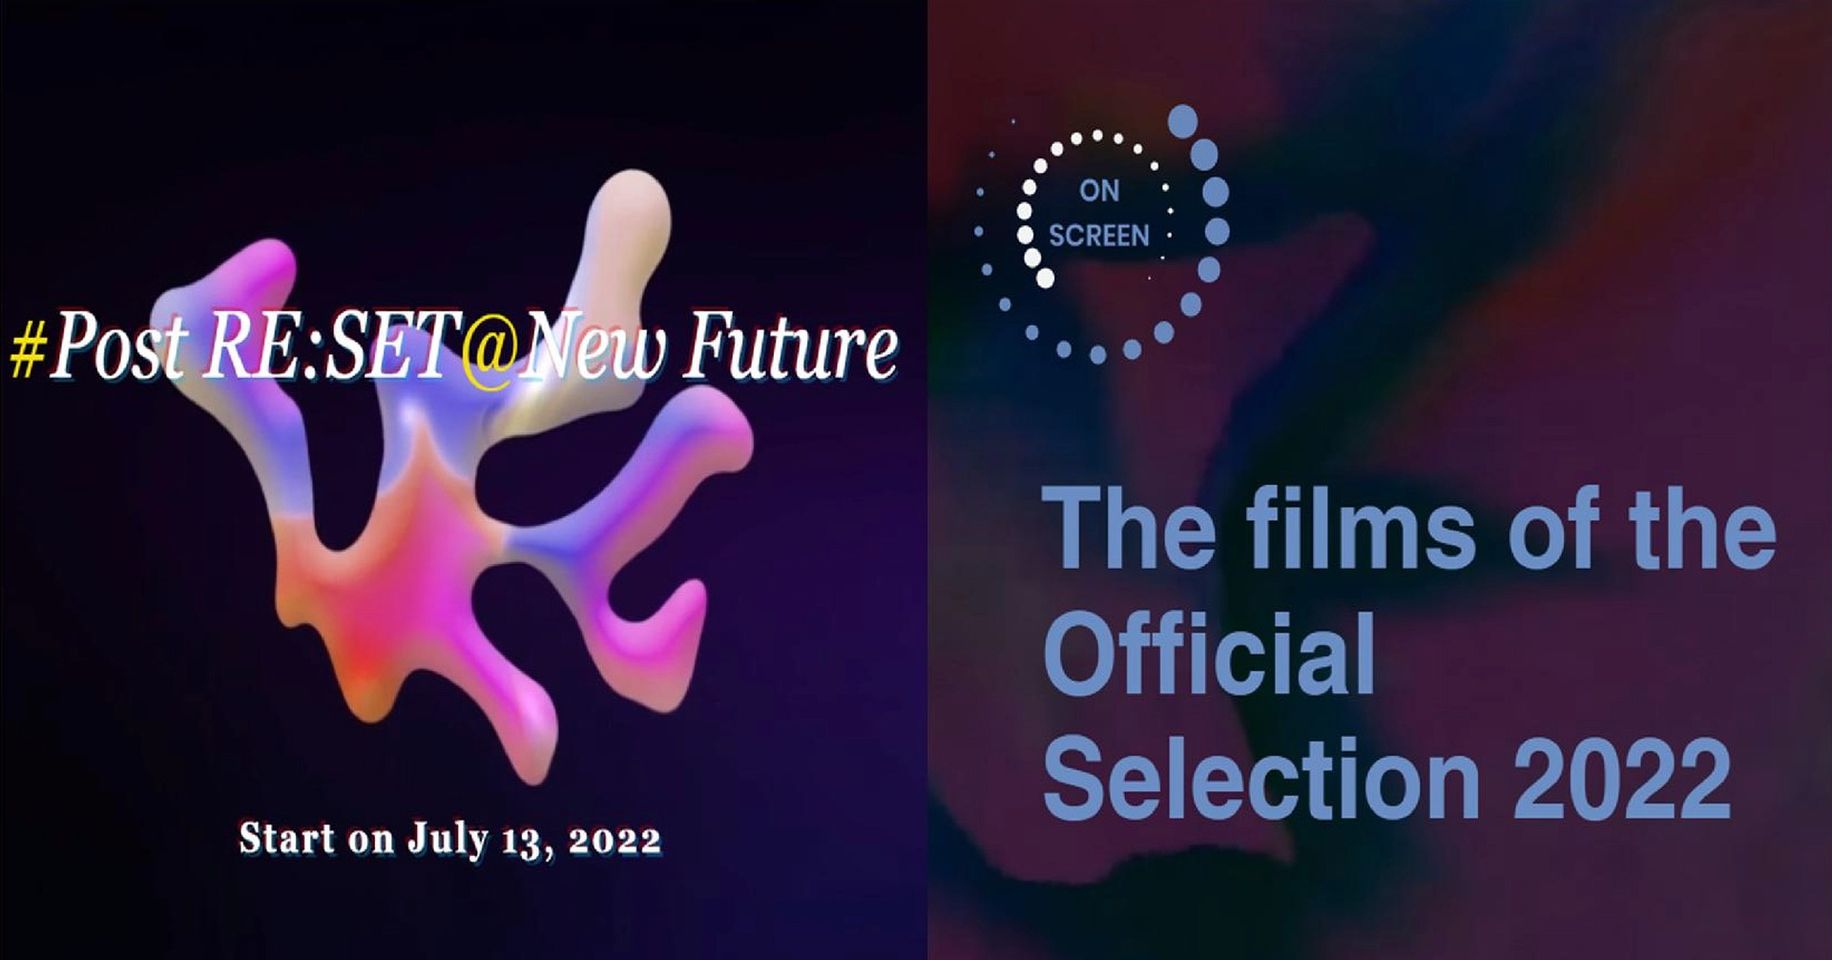 #Post RE:SET@New Future Official Selection 2022